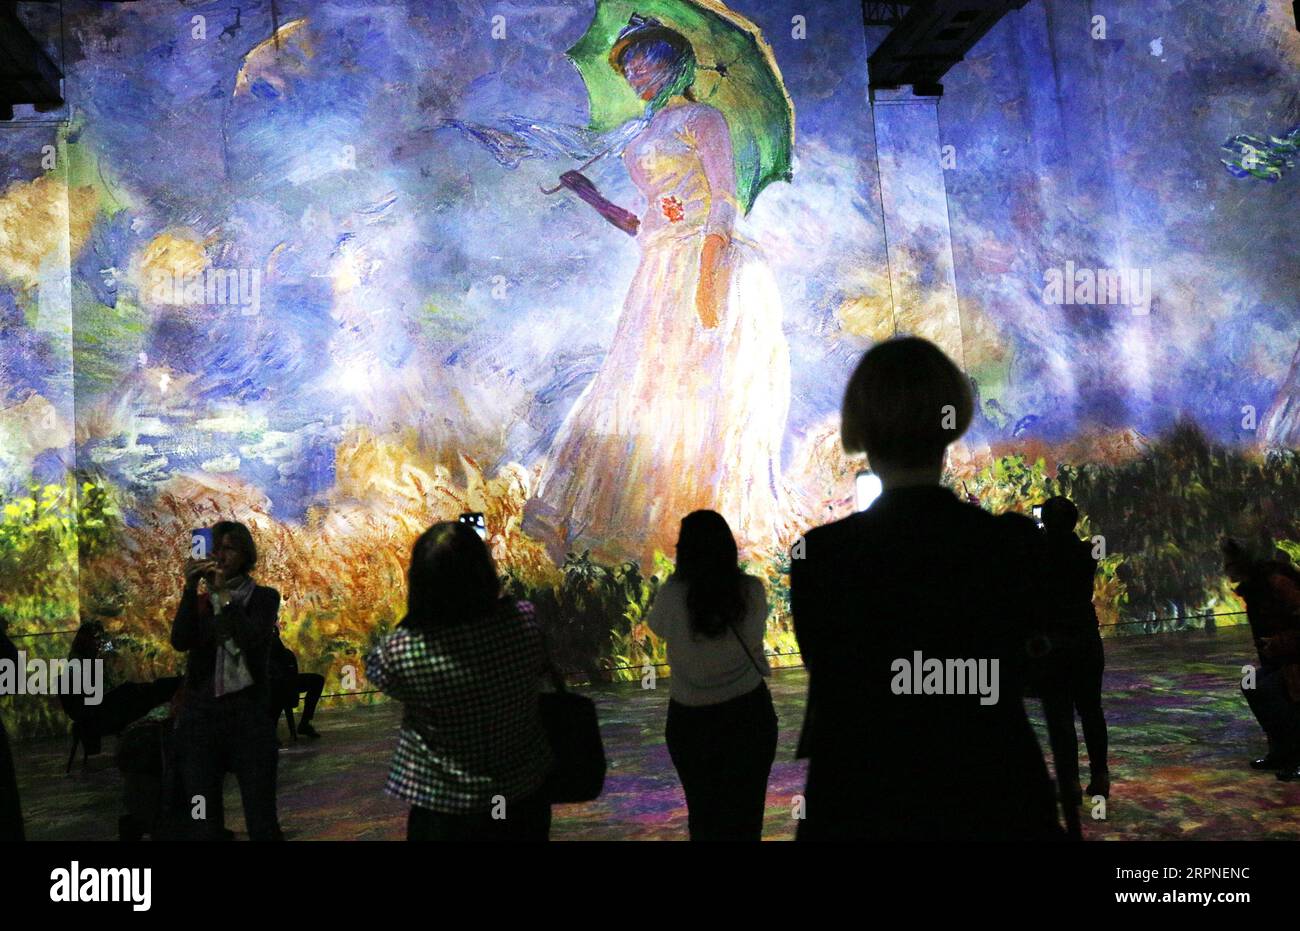 200227 -- PARIS, Feb. 27, 2020 -- People visit the digital exhibition titled Monet, Renoir...Chagall: Journeys around the Mediterranean during a press review in Paris, France, Feb. 27, 2020. The digital exhibition to be held from Feb. 28, 2020 to Jan. 3, 2021 presents visitors with an itinerary that spans the period between Impressionism and modernism. The exhibition immerses visitors in the masterpieces of 20 artists, including Renoir, Monet, Matisse, Chagall etc., and highlights the link between artistic creativity and the Mediterranean shores.  FRANCE-PARIS-DIGITAL EXHIBITION GaoxJing PUBLI Stock Photo